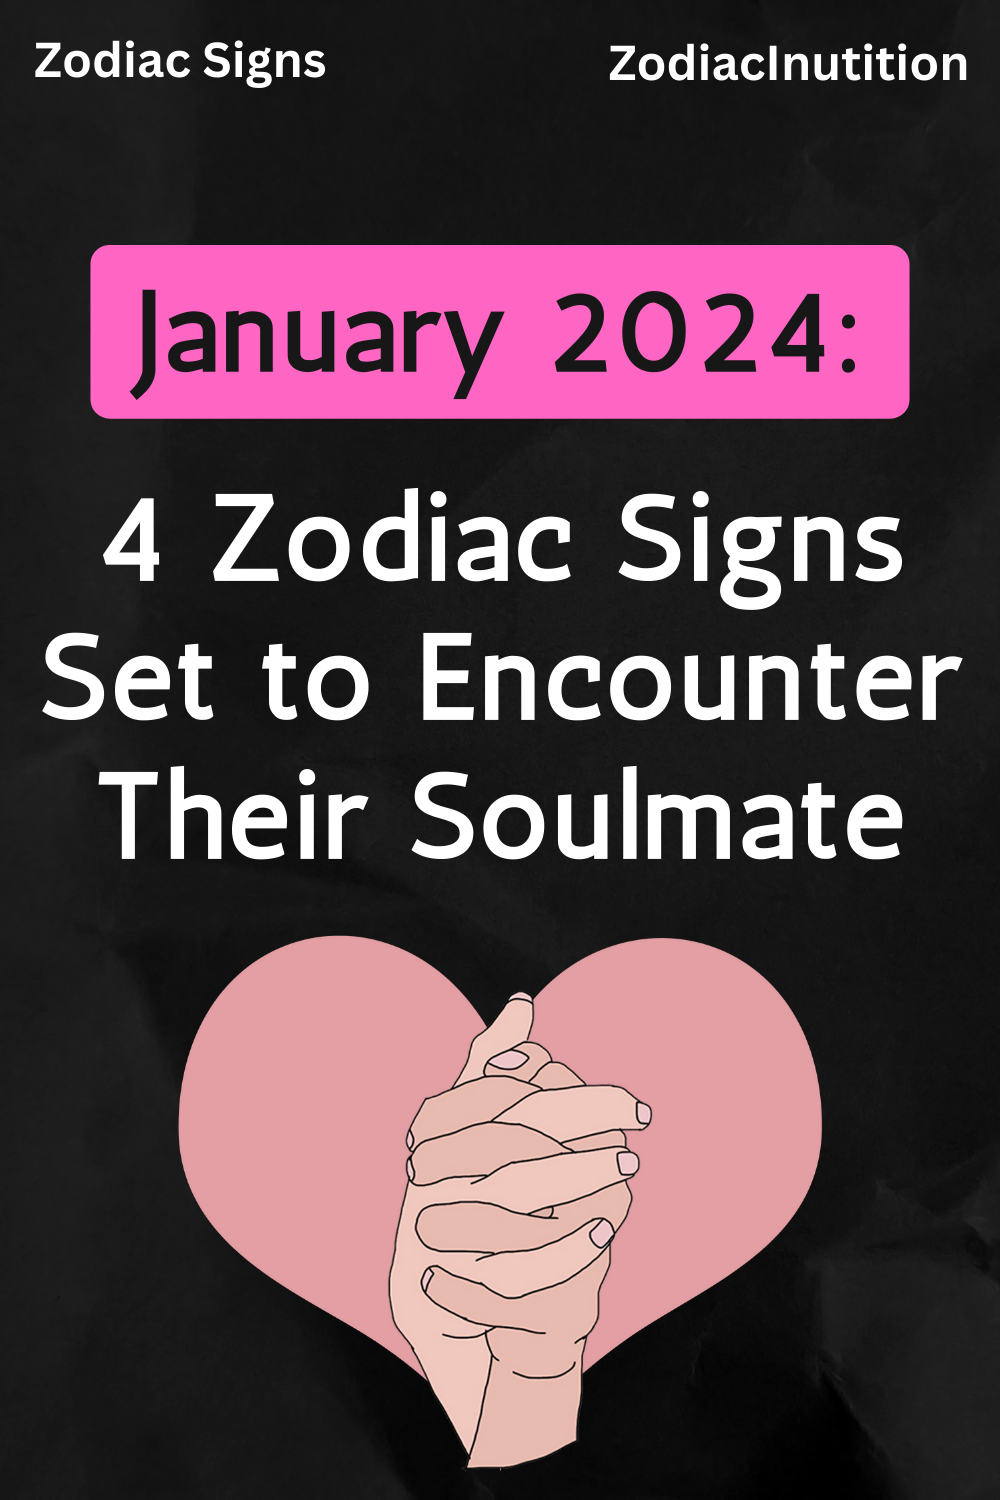 January 2024: 4 Zodiac Signs Set to Encounter Their Soulmate